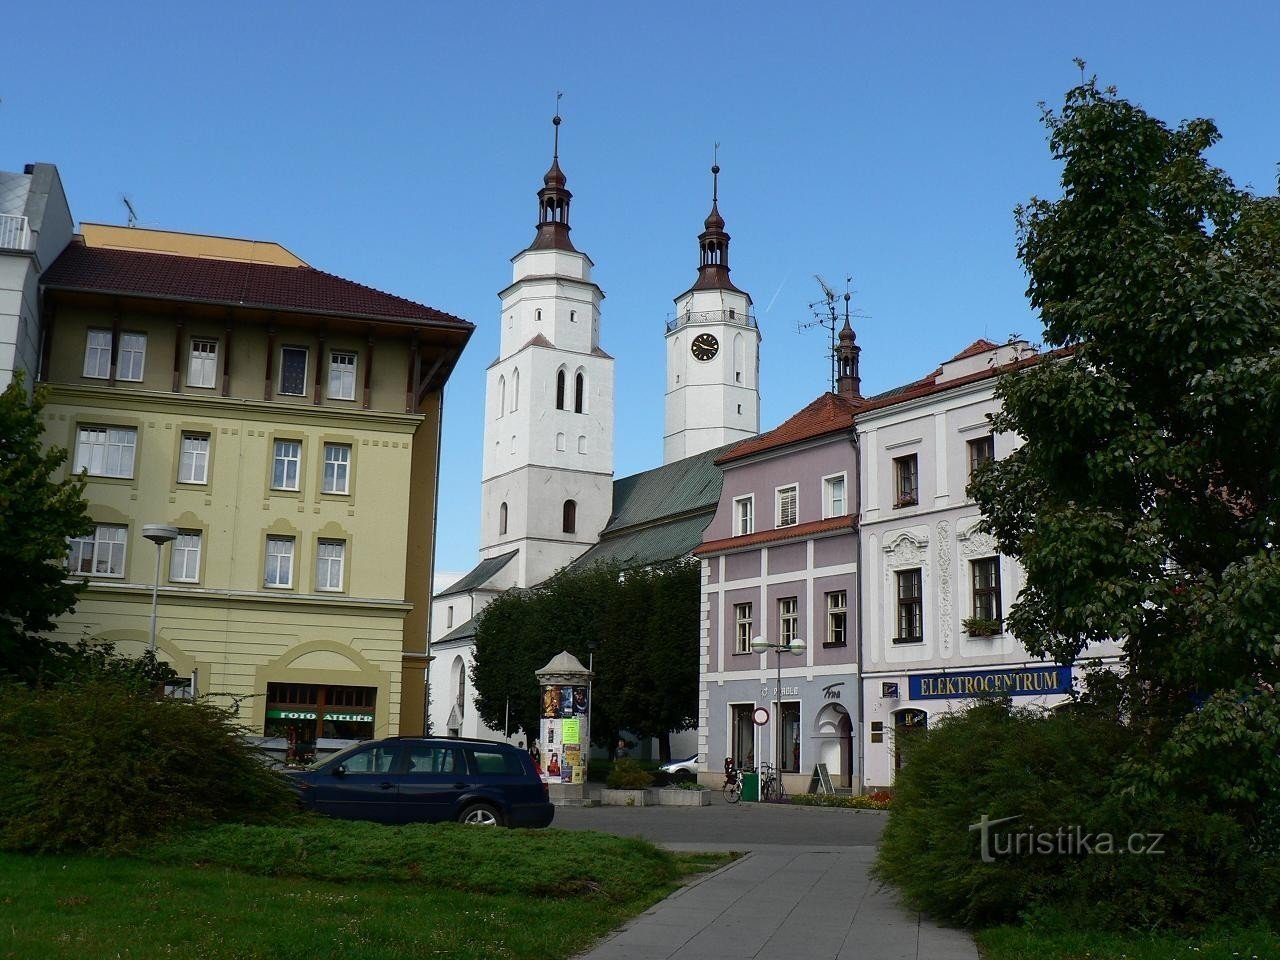 Krnov, view of the church from the square